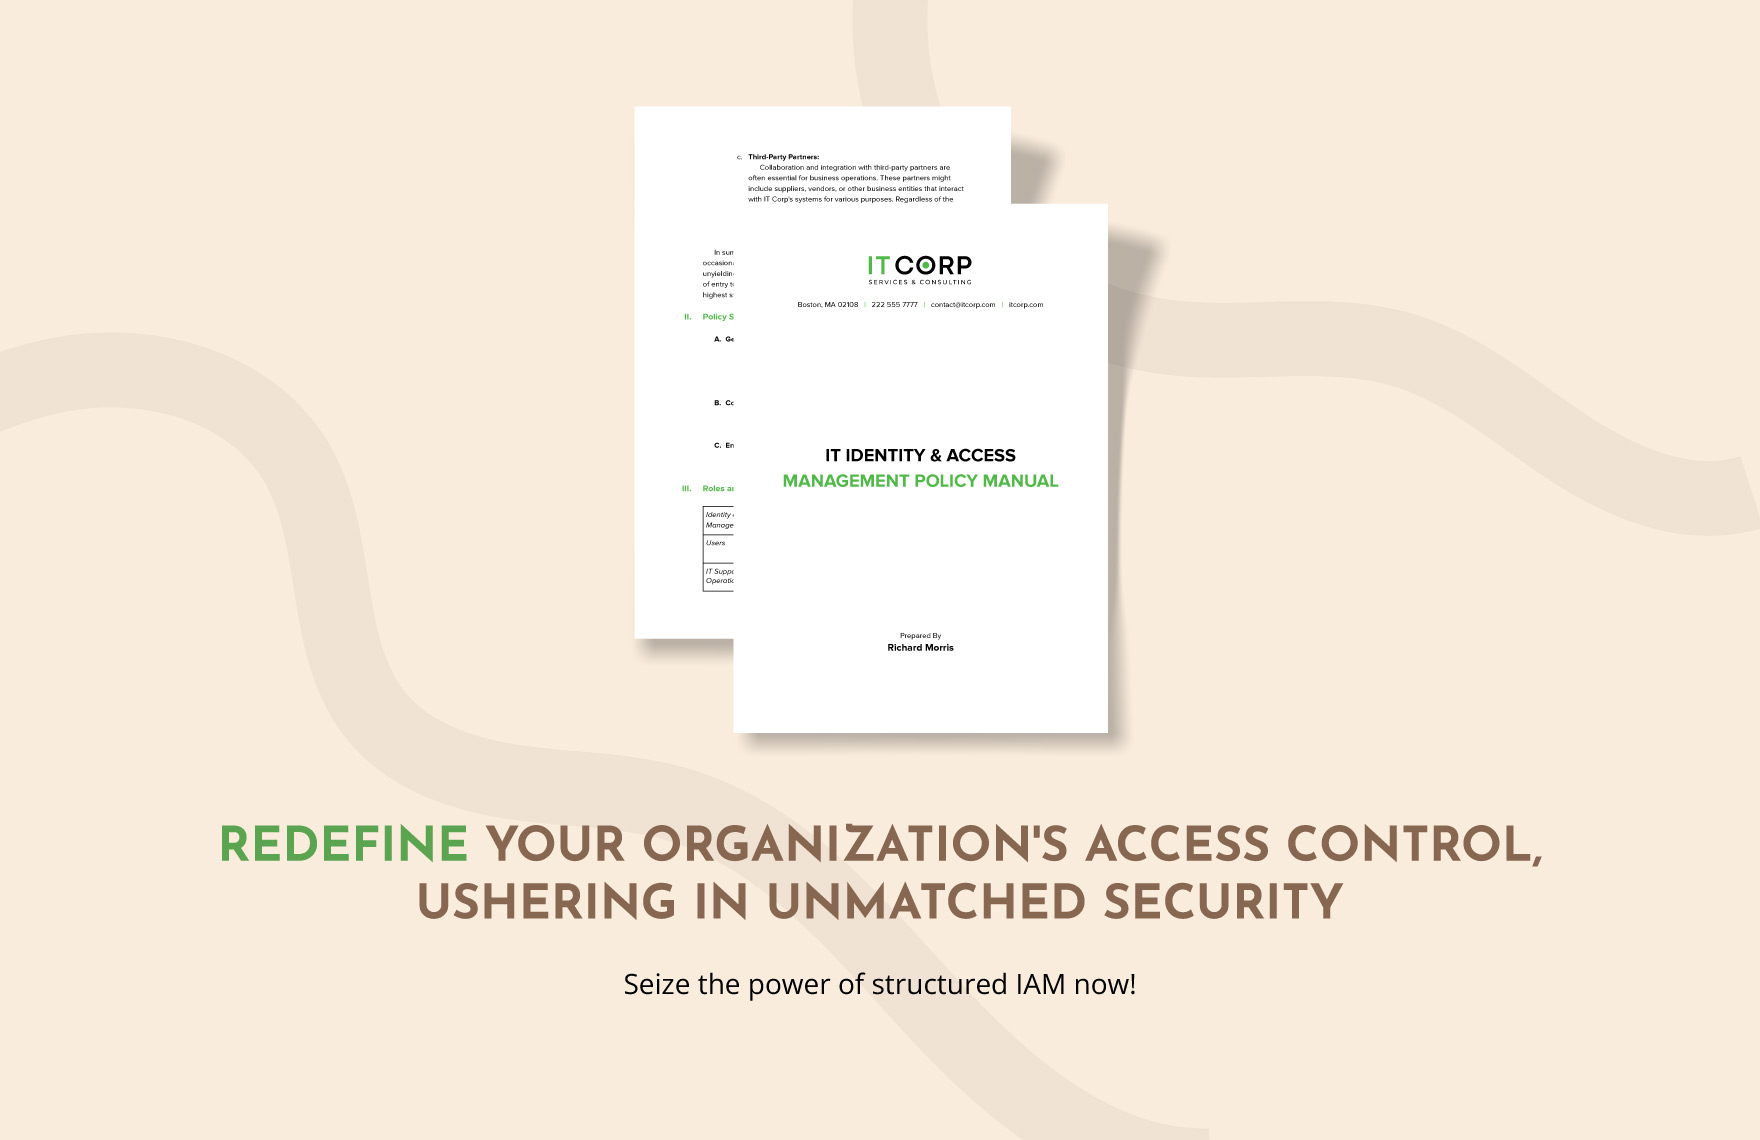 IT Identity & Access Management Policy Manual Template